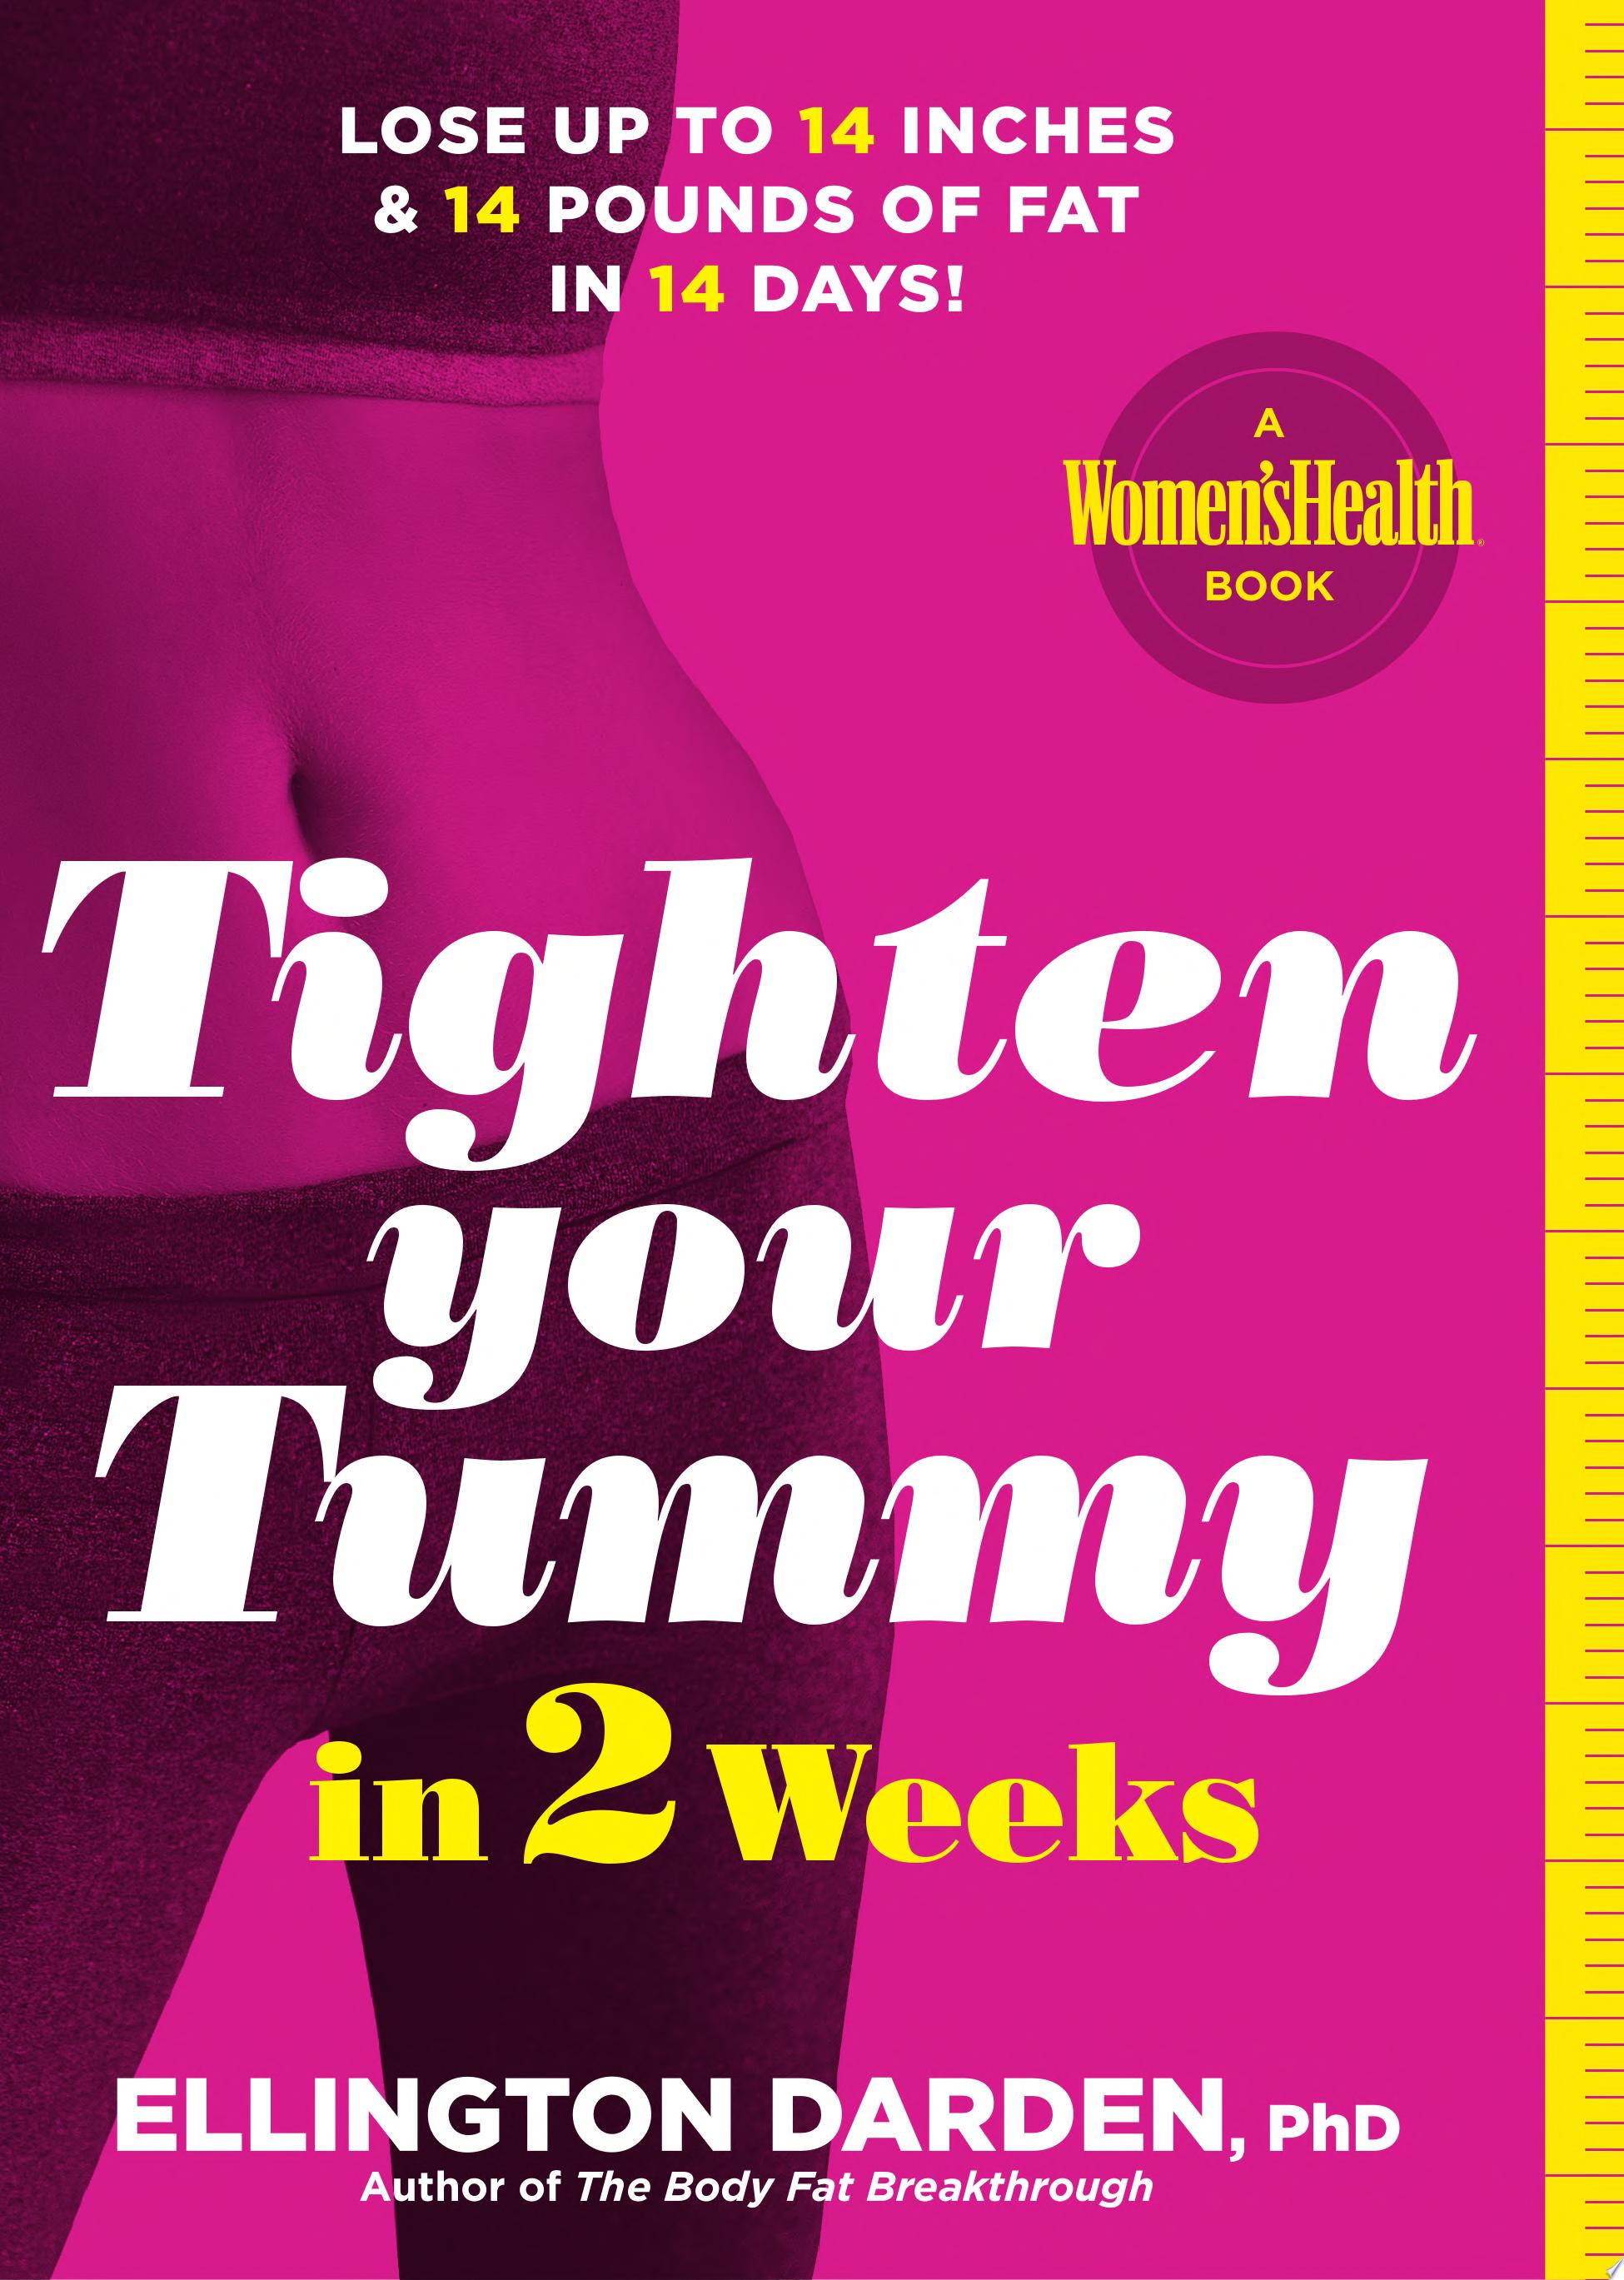 Image for "Tighten Your Tummy in 2 Weeks"